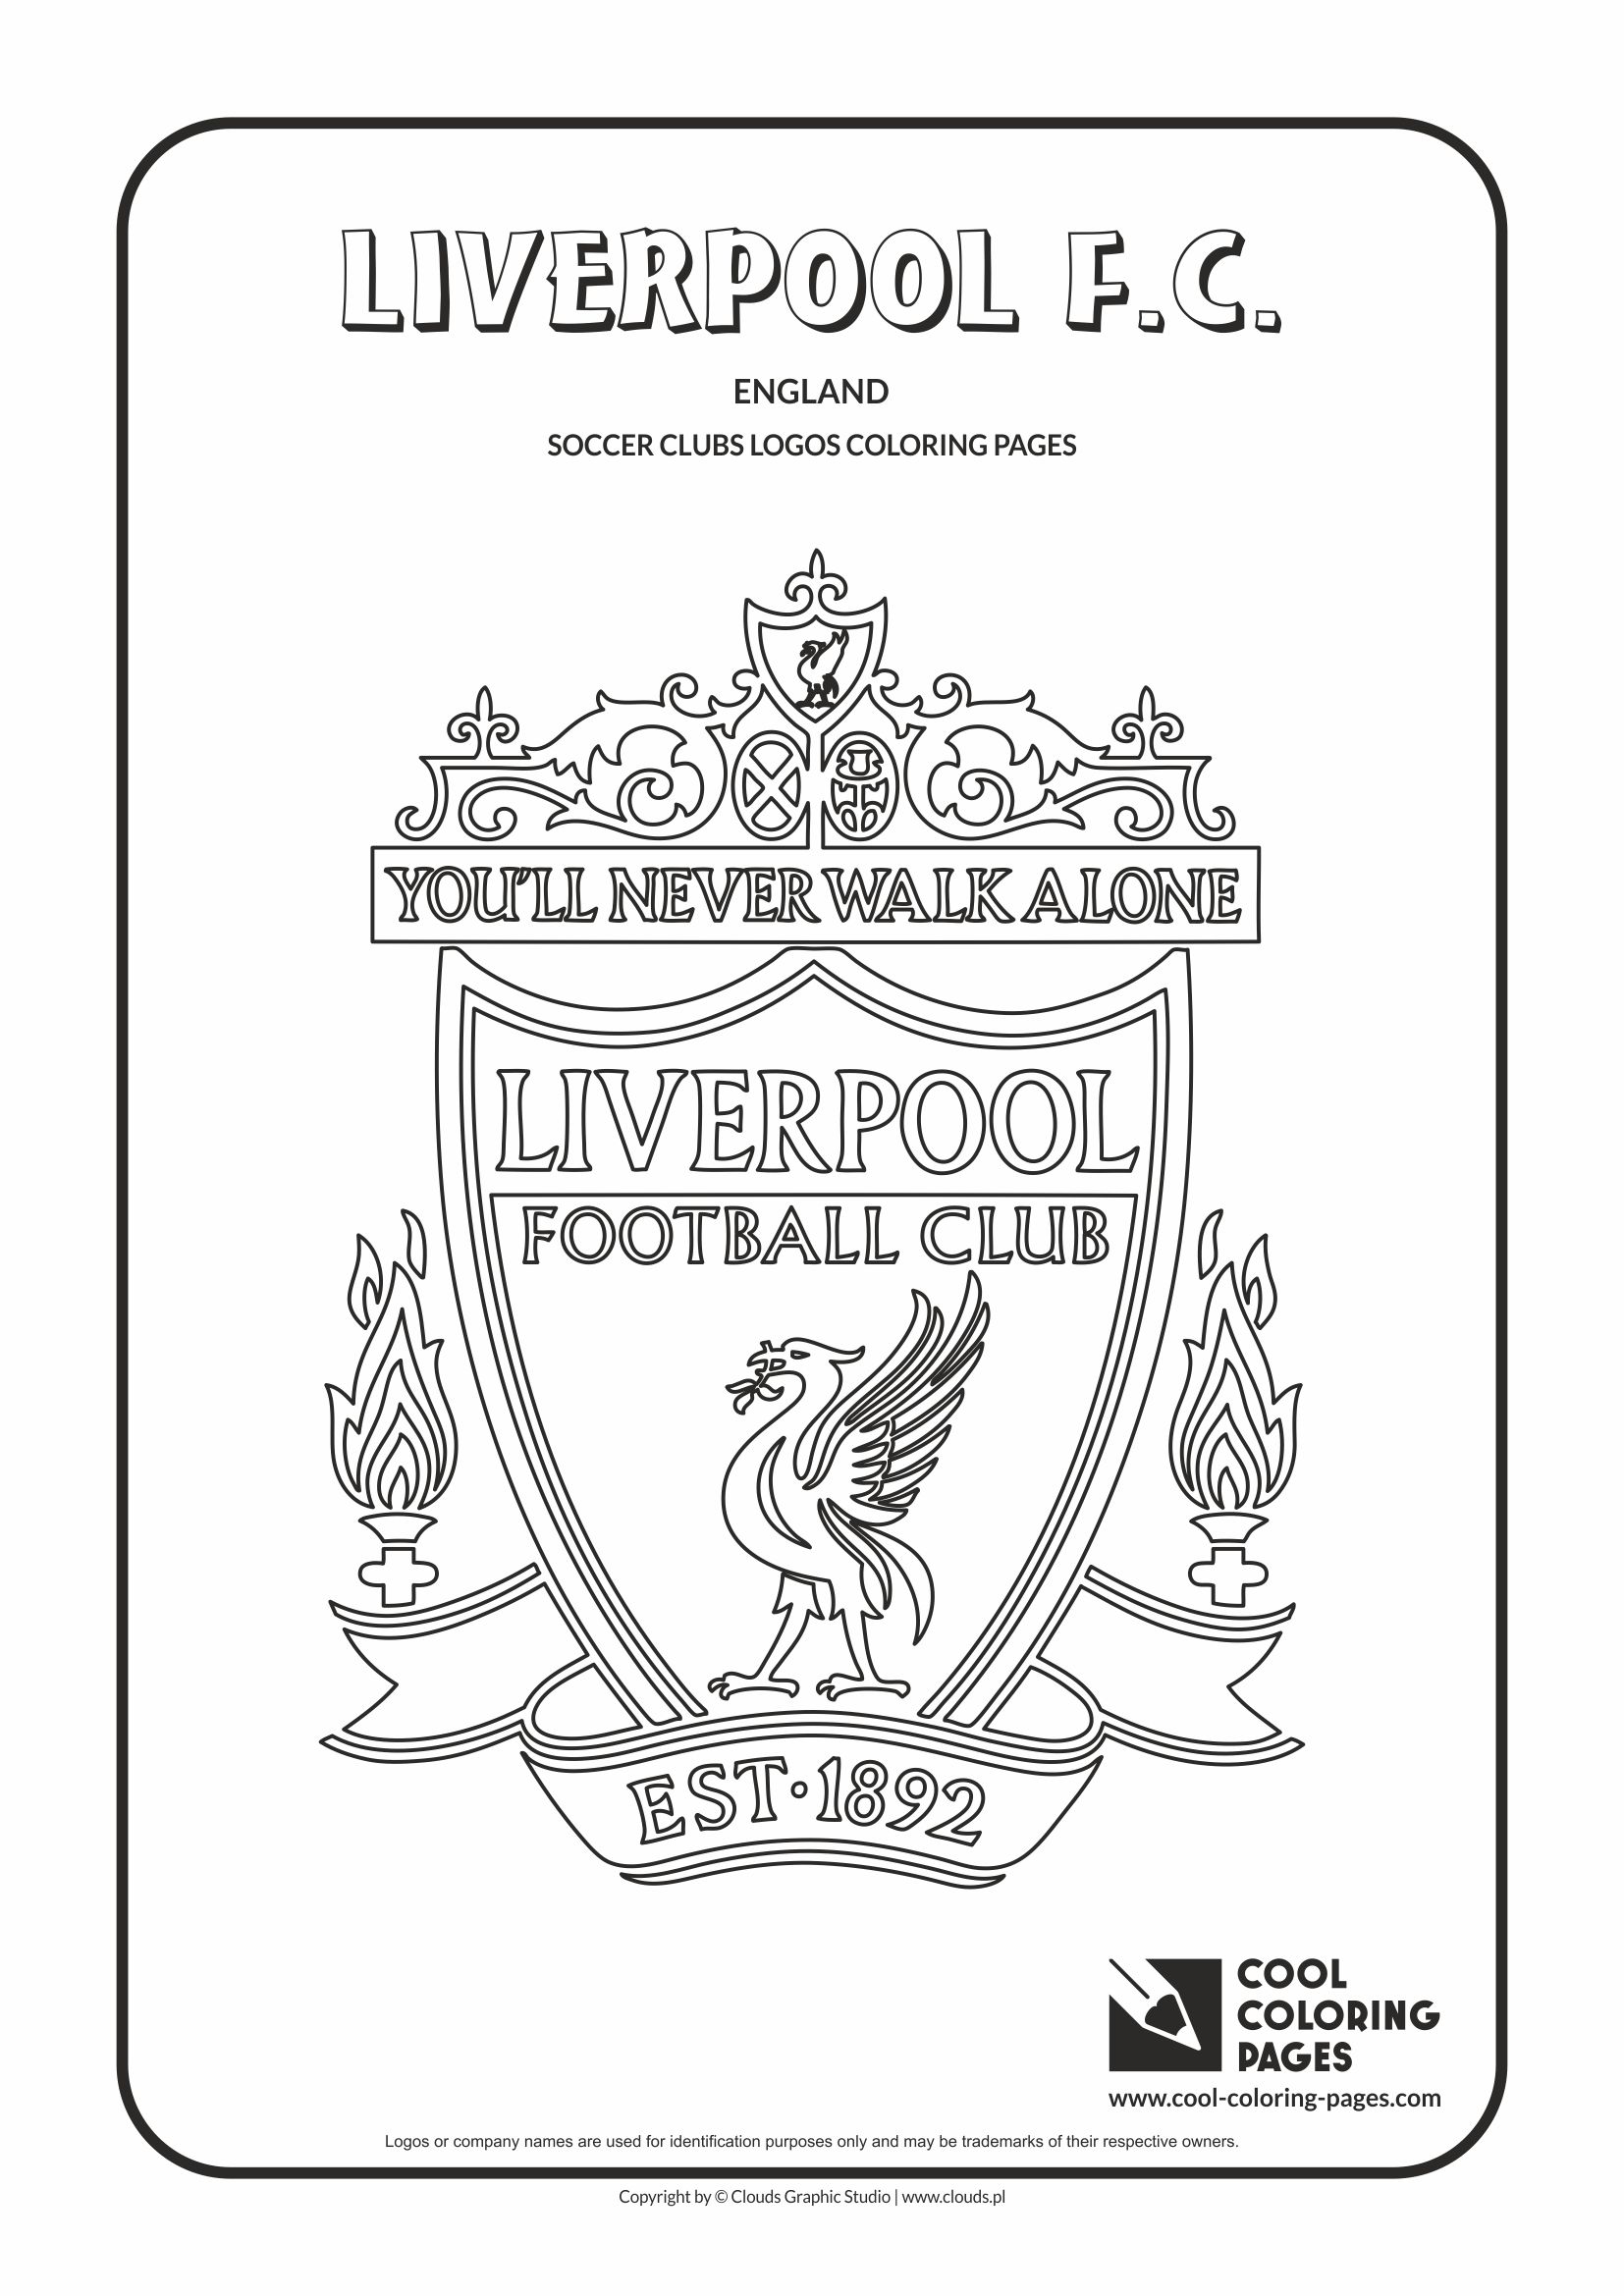 Cool Coloring Pages Liverpool F.C. logo coloring page - Cool Coloring